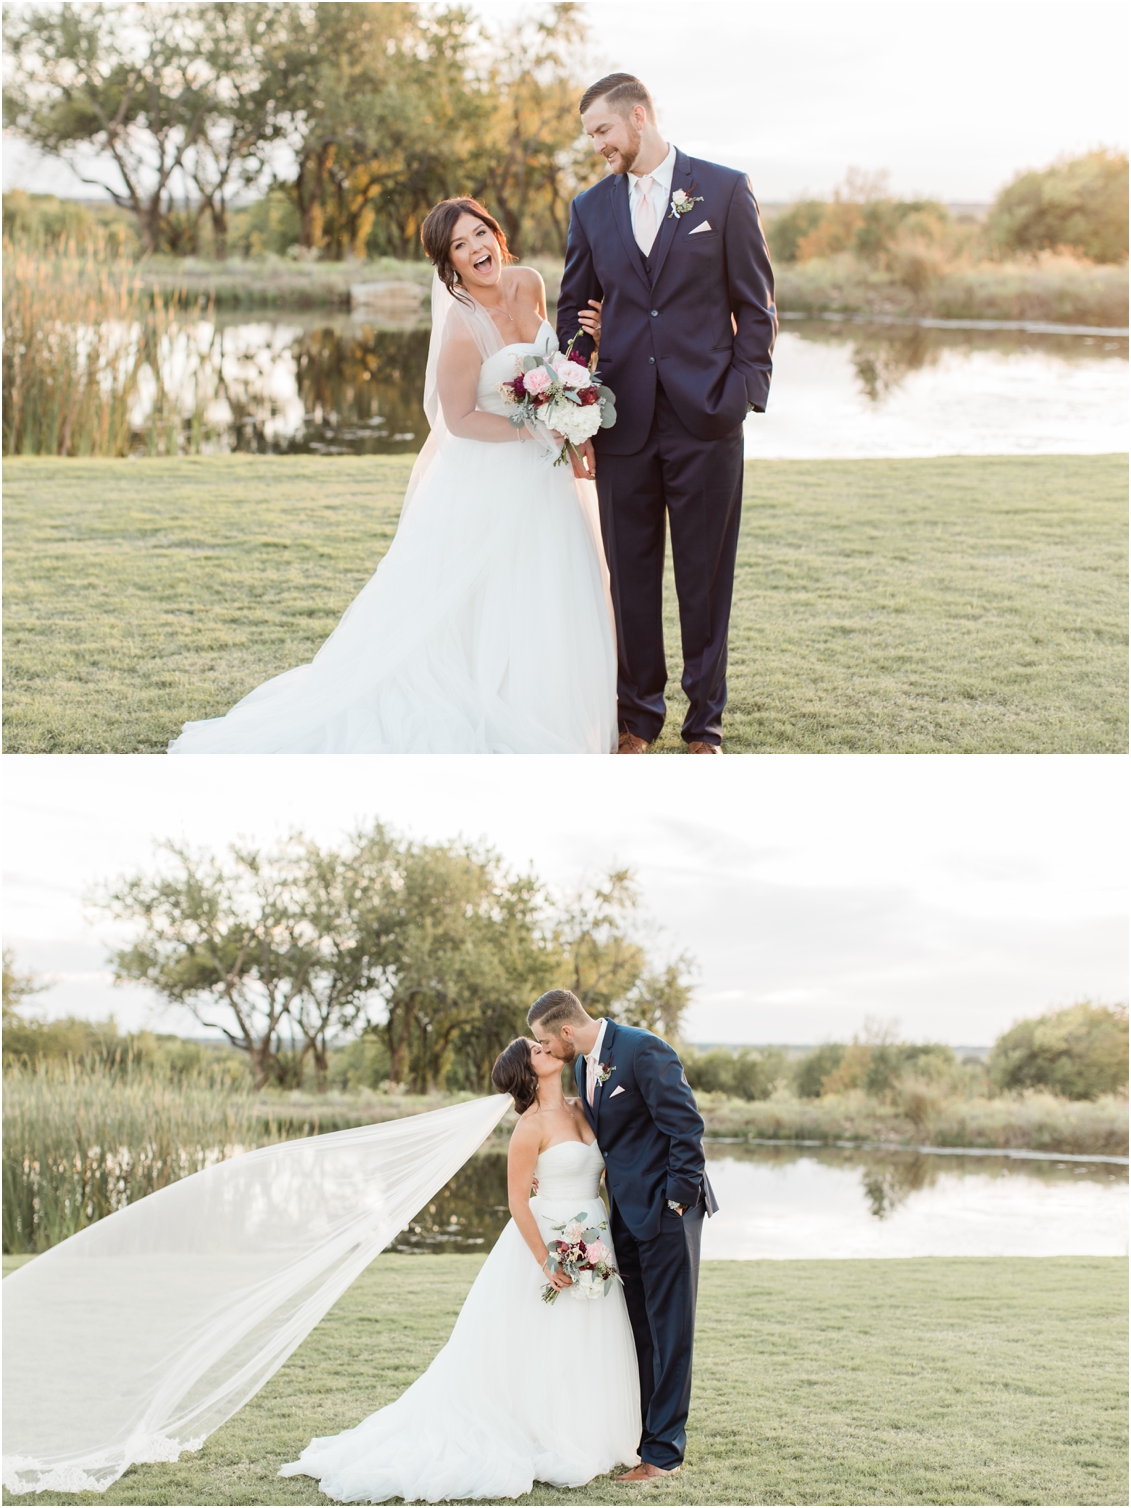 Wedding at the Nest at Ruth Farms, Texas wedding venue, bride and groom portrait